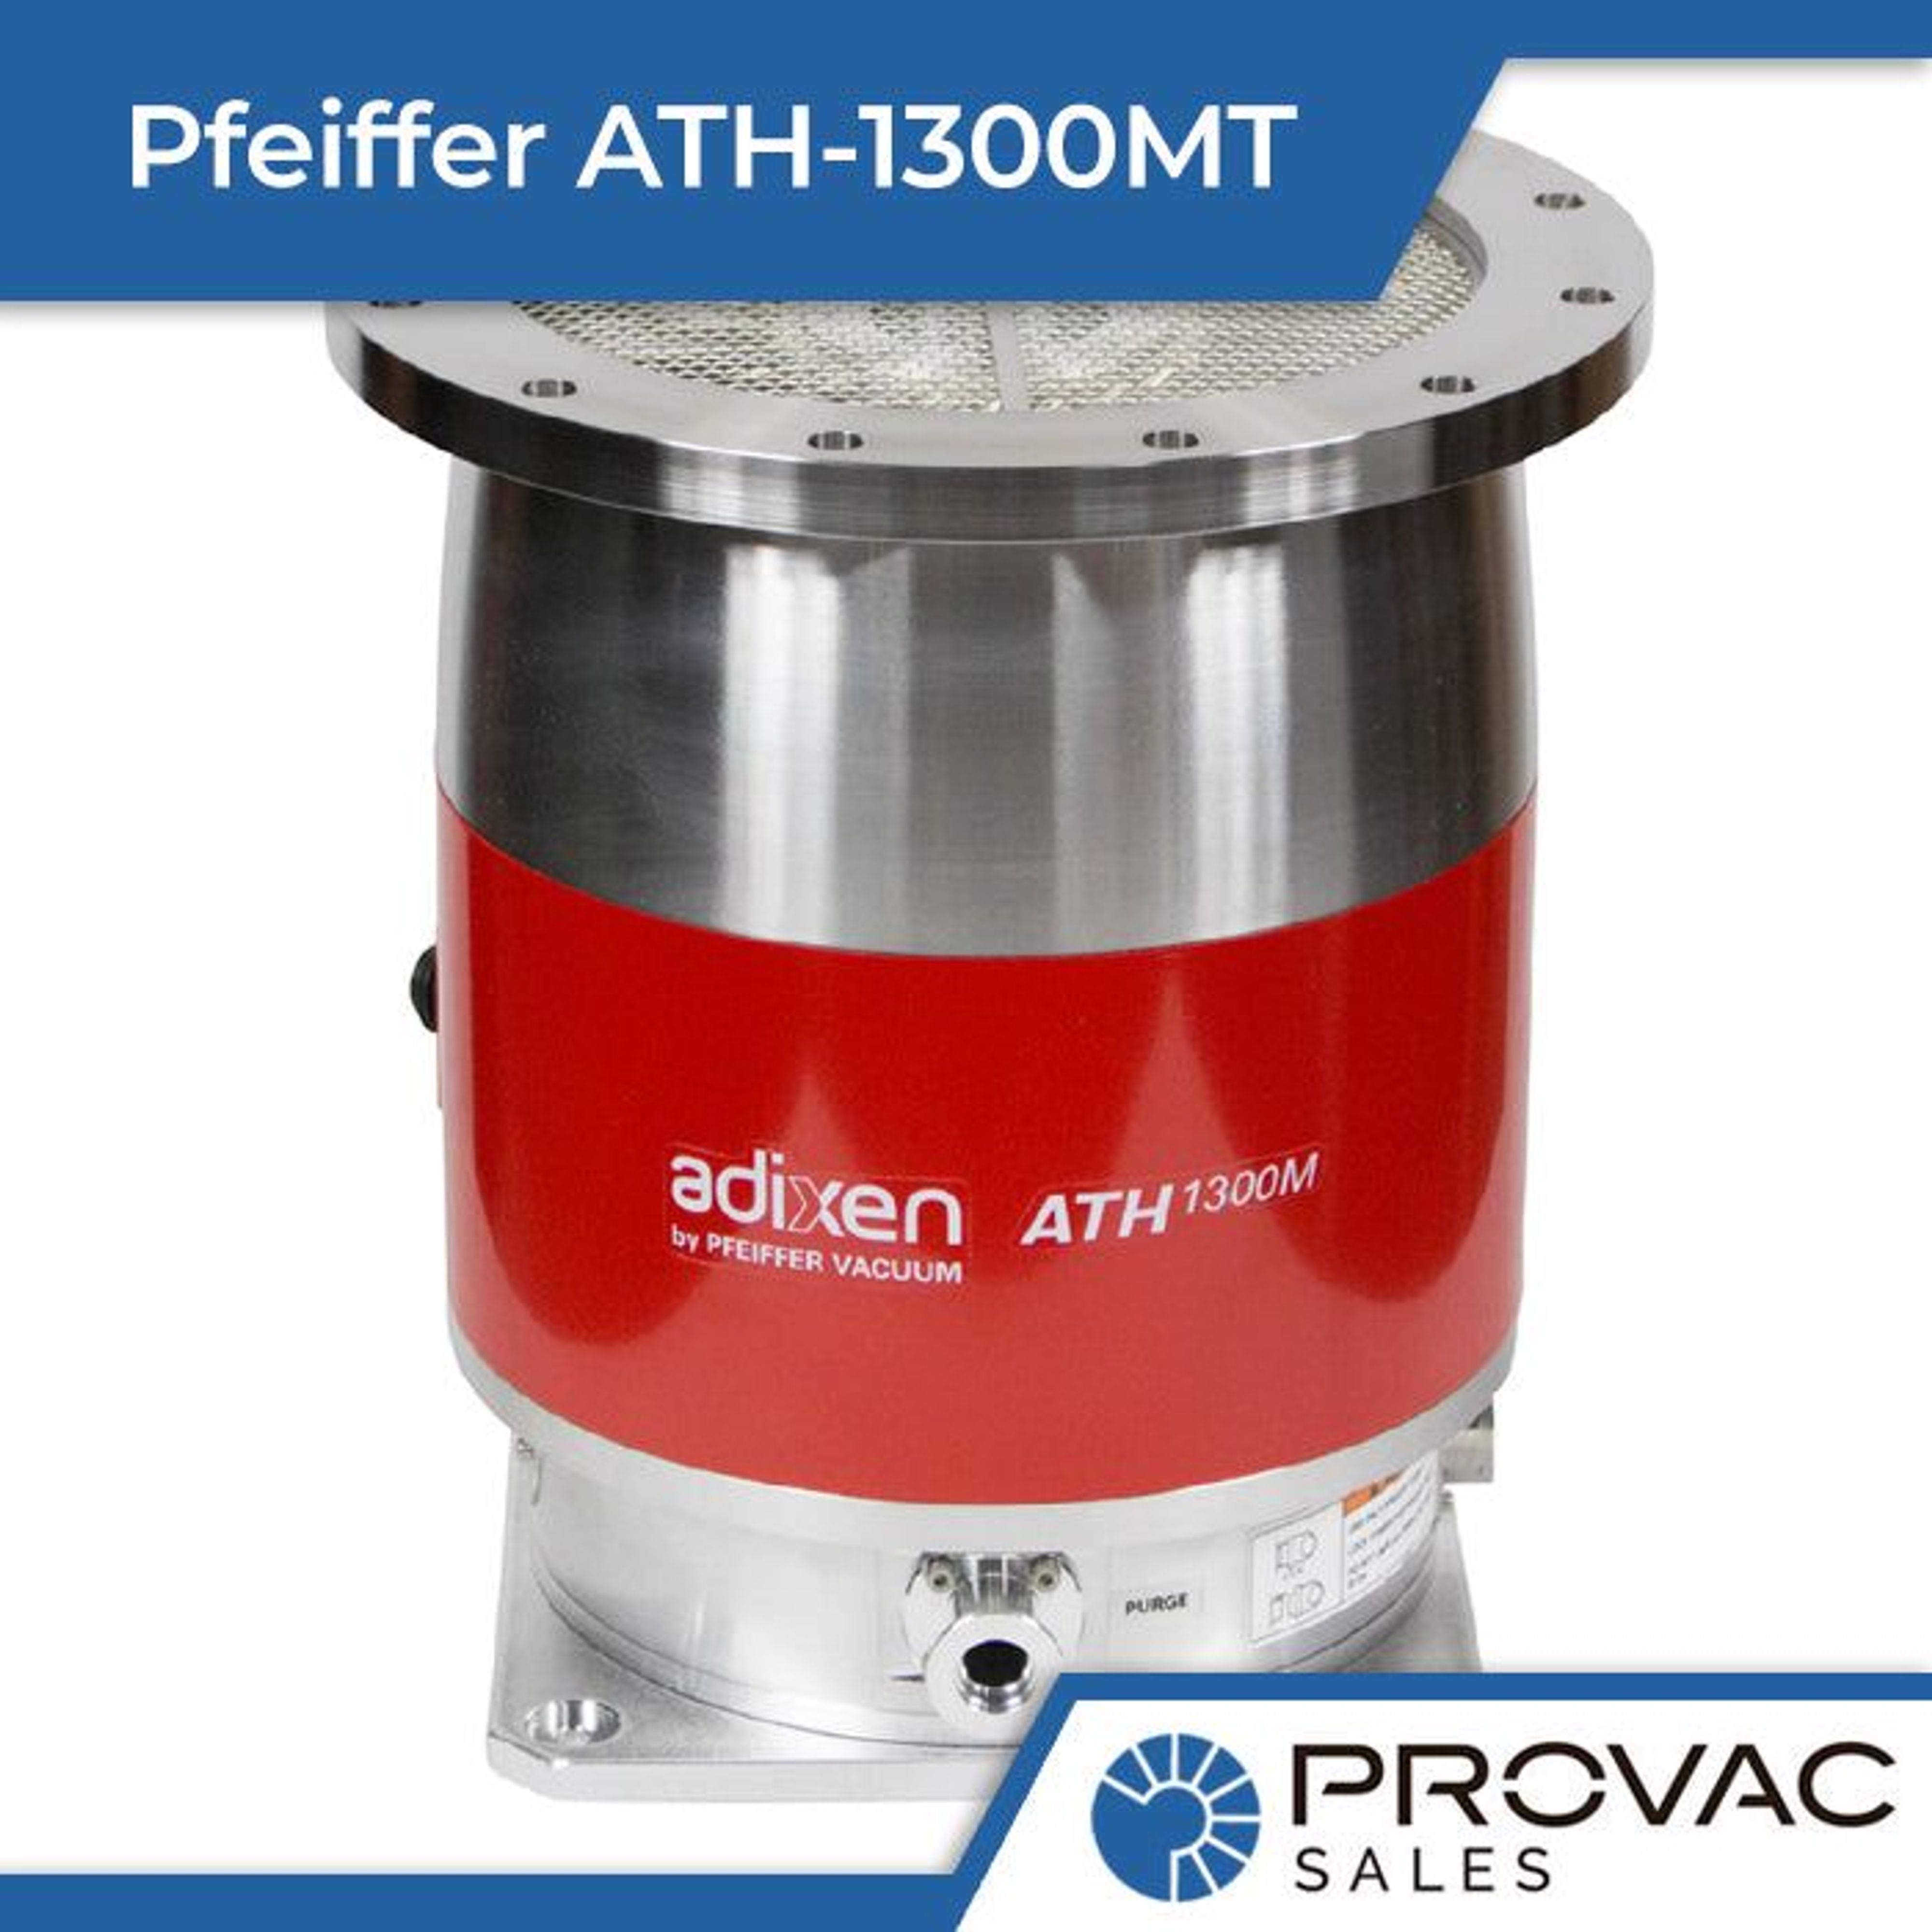 Pfeiffer ATH-1300MT Magnetically Levitated Turbo Pumps, In Stock Now Background